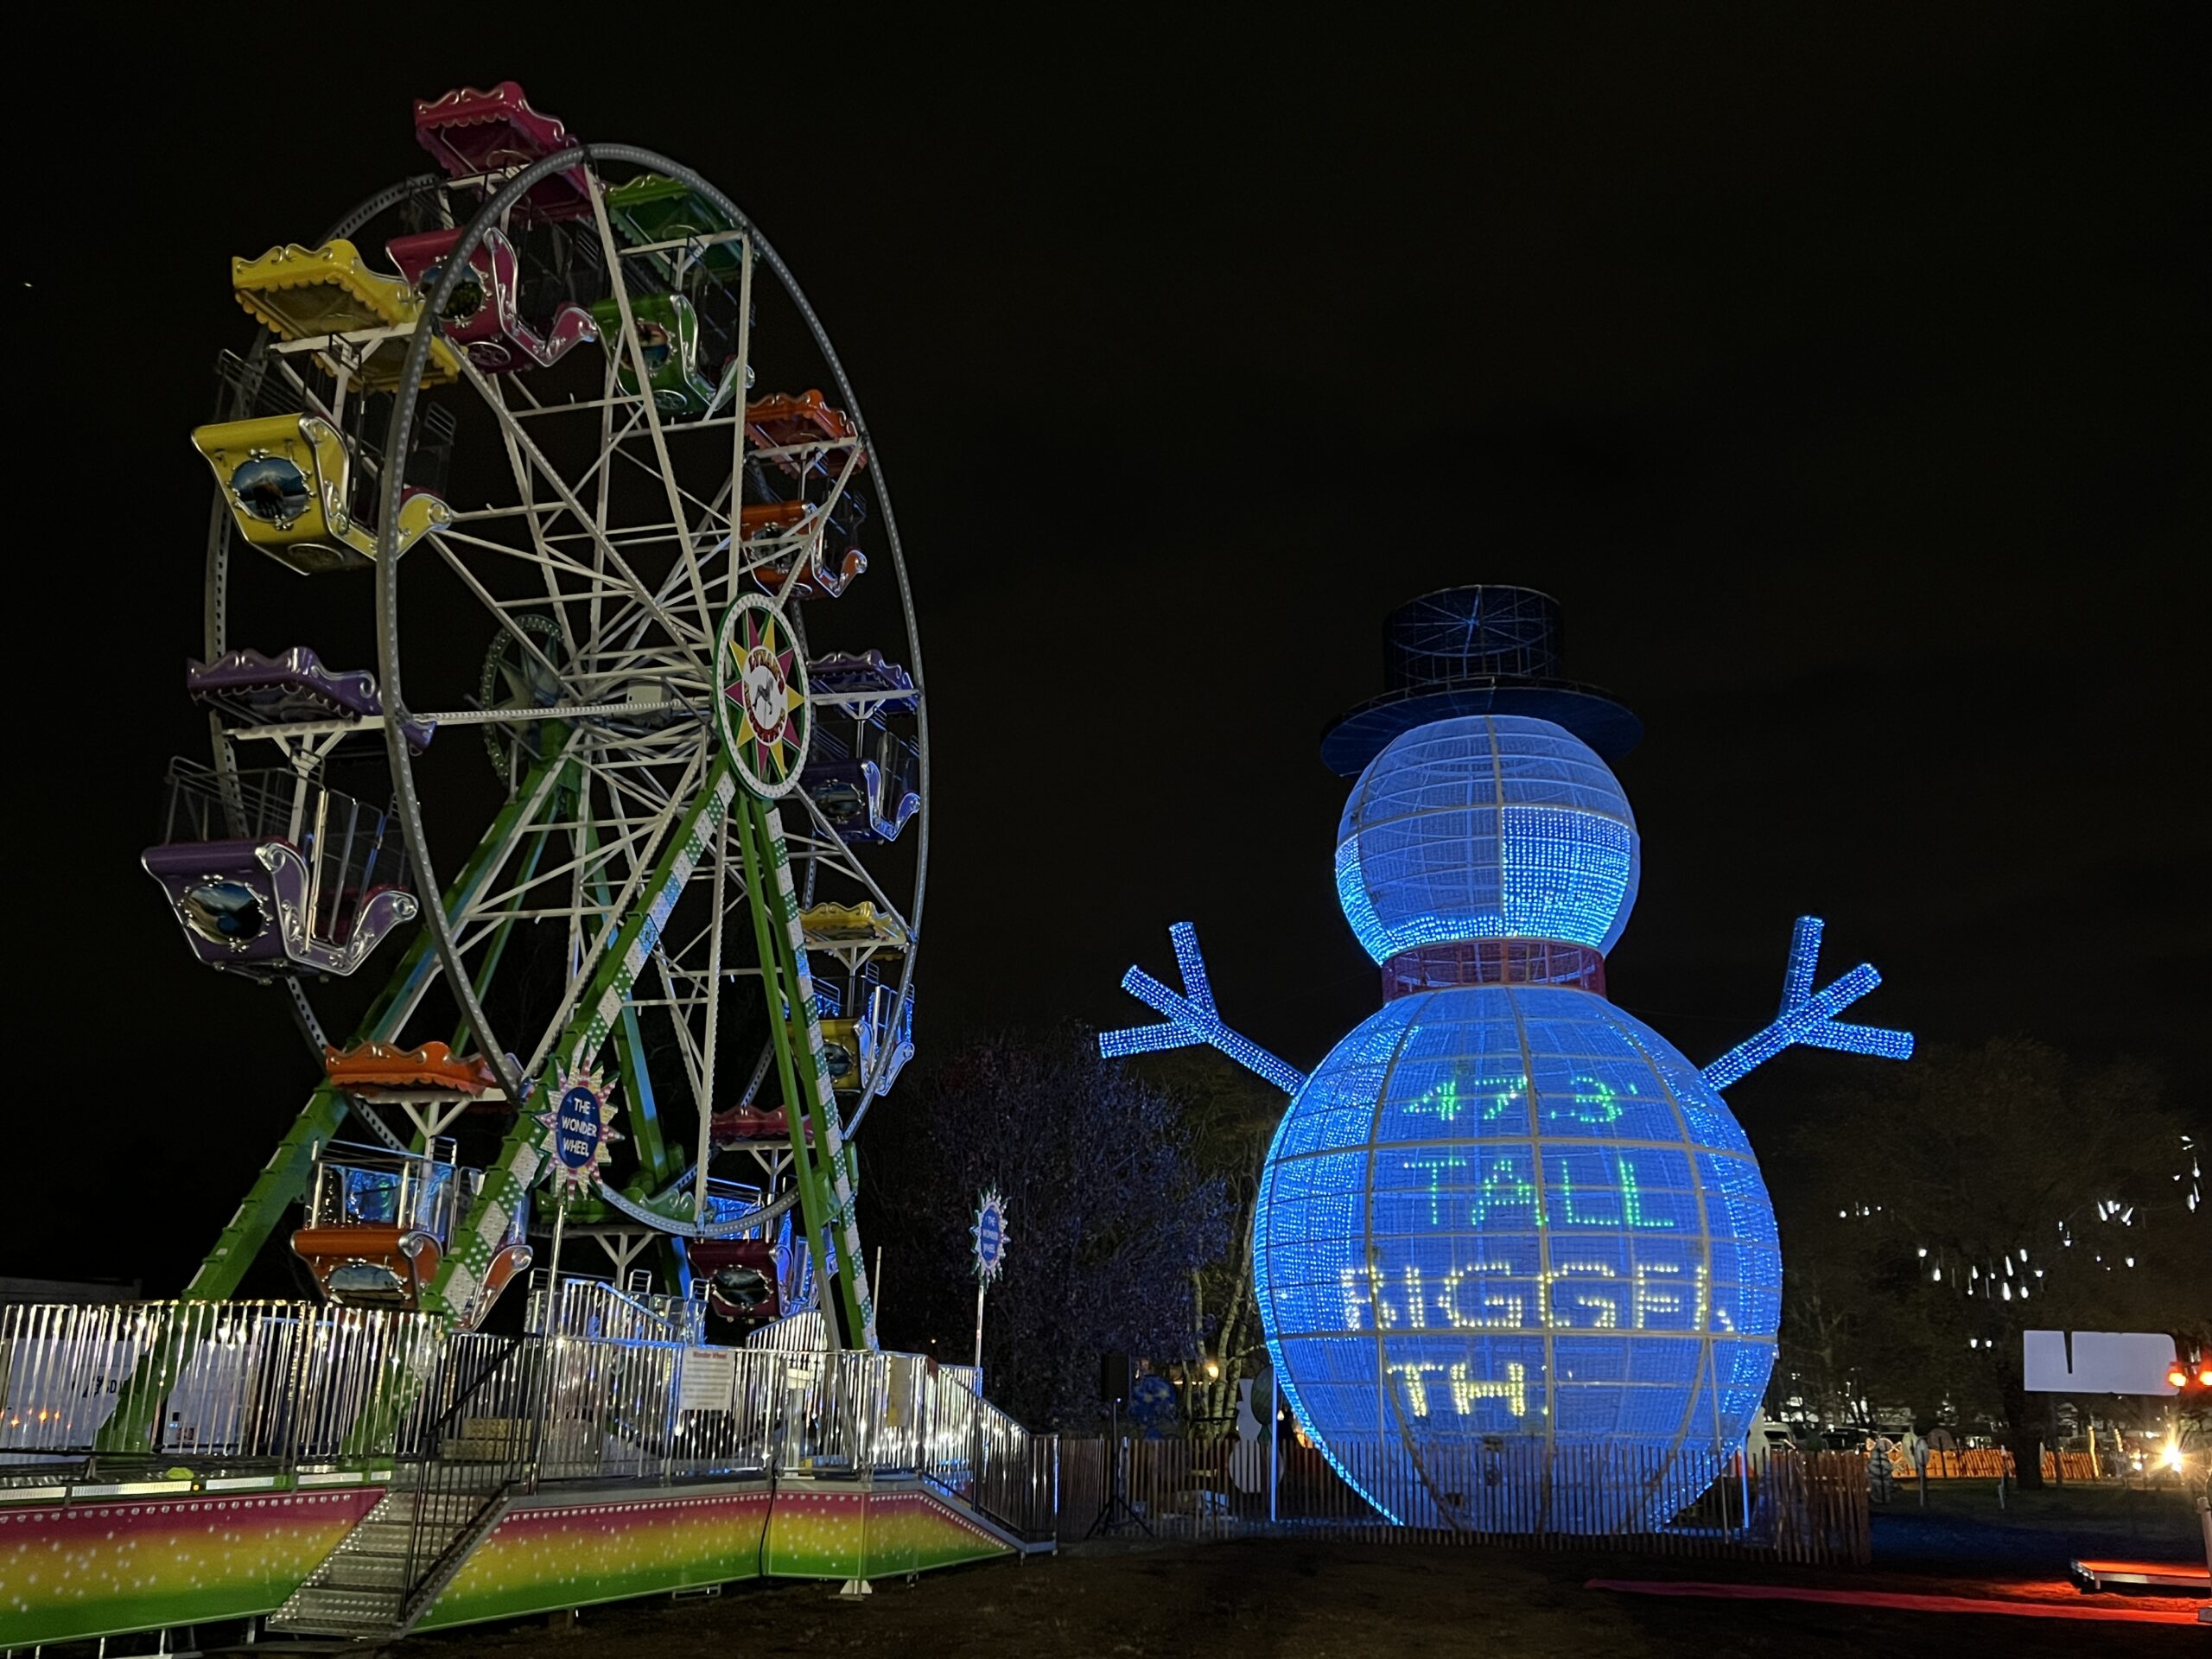 World's largest LED snowman at GLOW in Washington Township, New Jersey